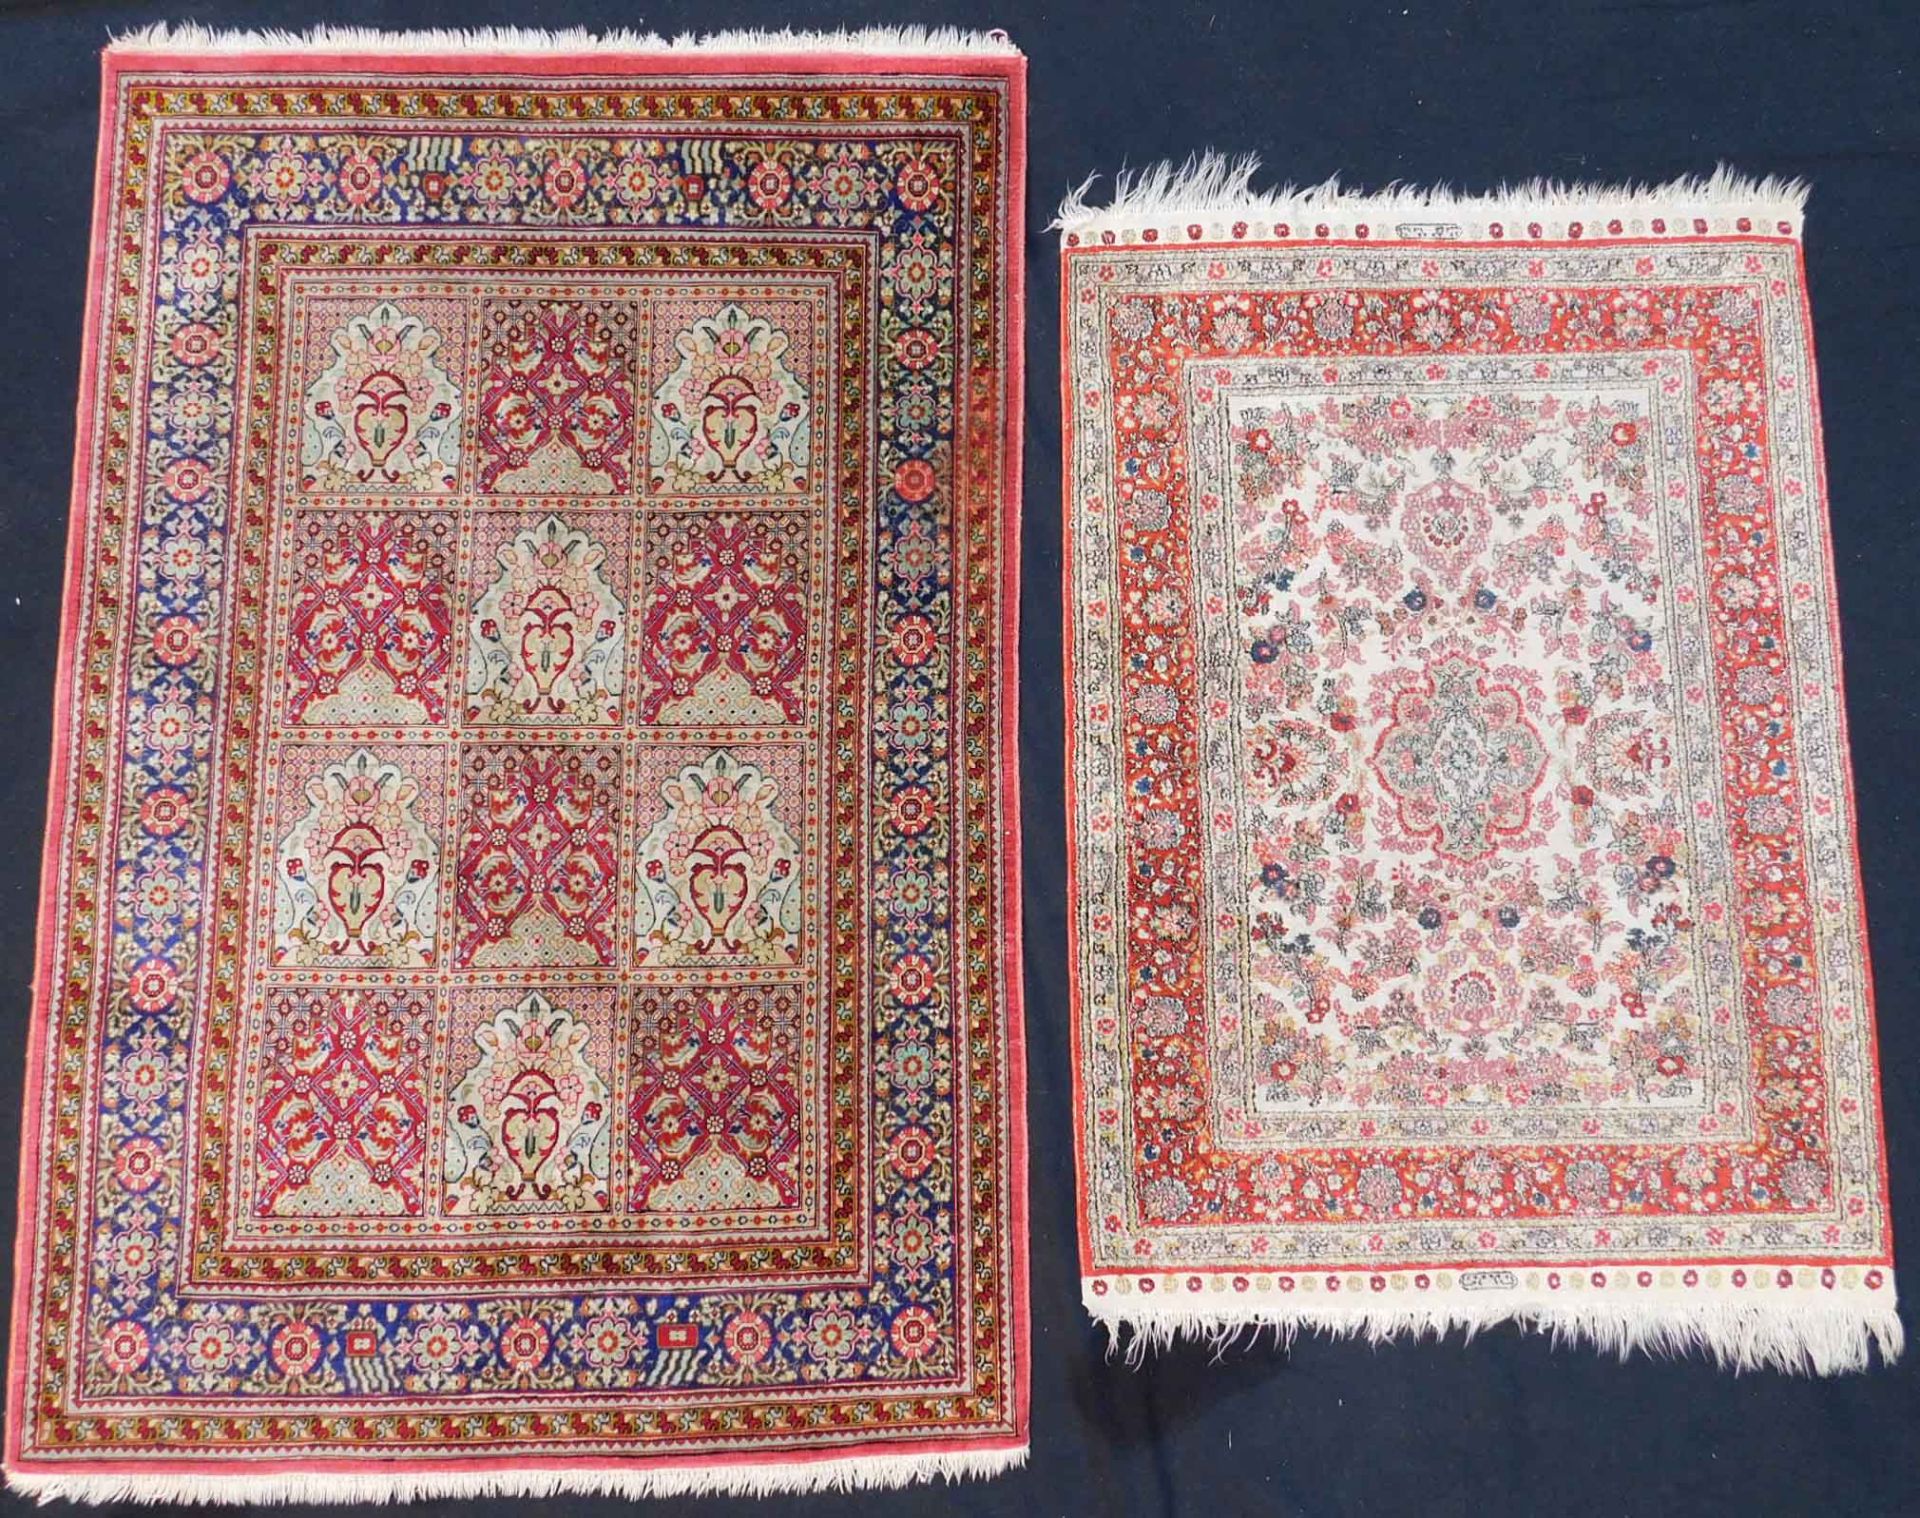 Two carpets. Silk. Extremely fine weave. Hand knotted. Silk on silk.